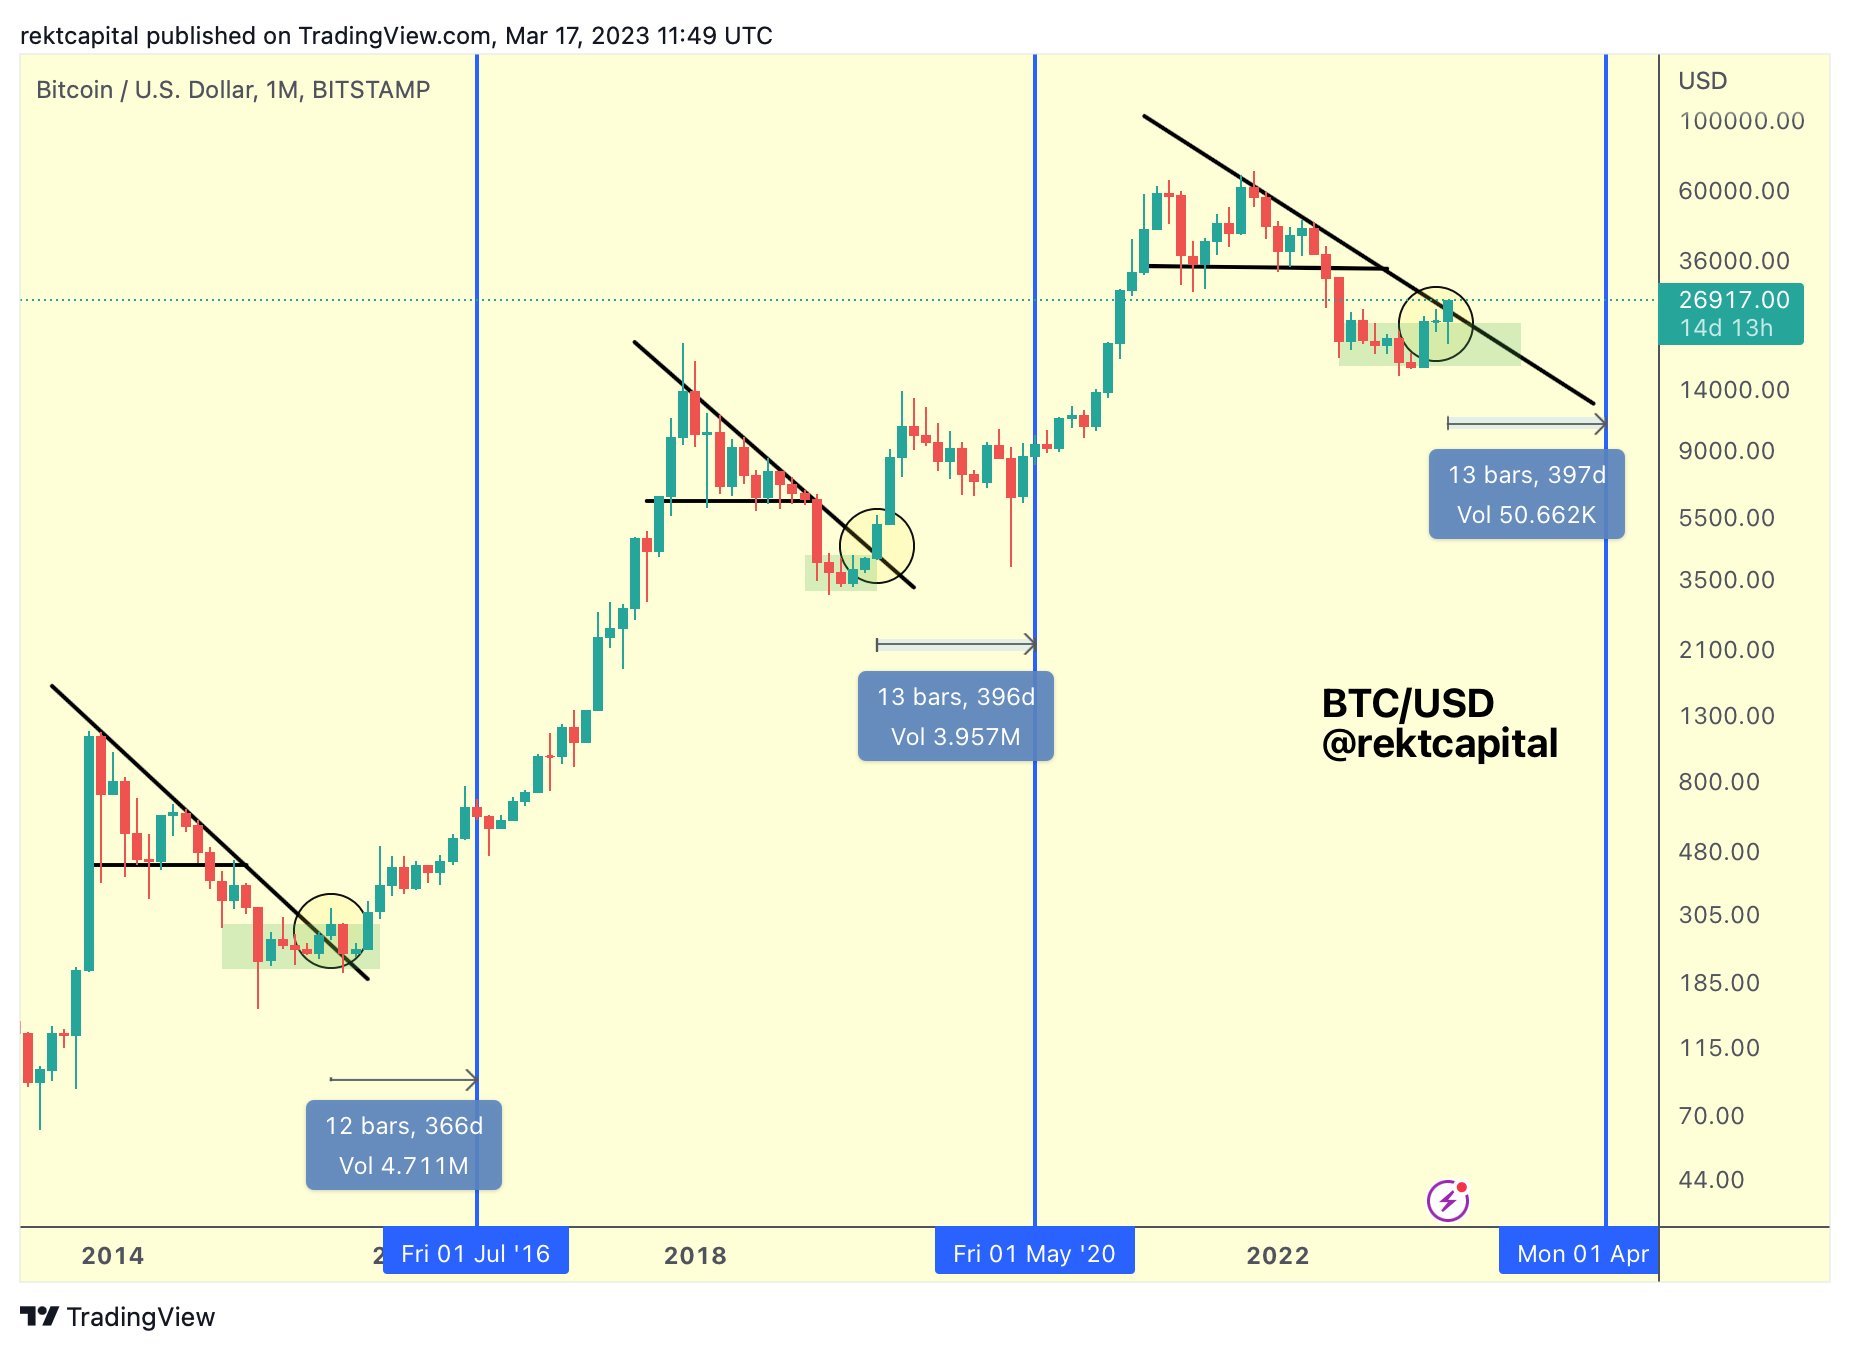 Will the Bitcoin Halving Cause Another BTC Price Hype Cycle?